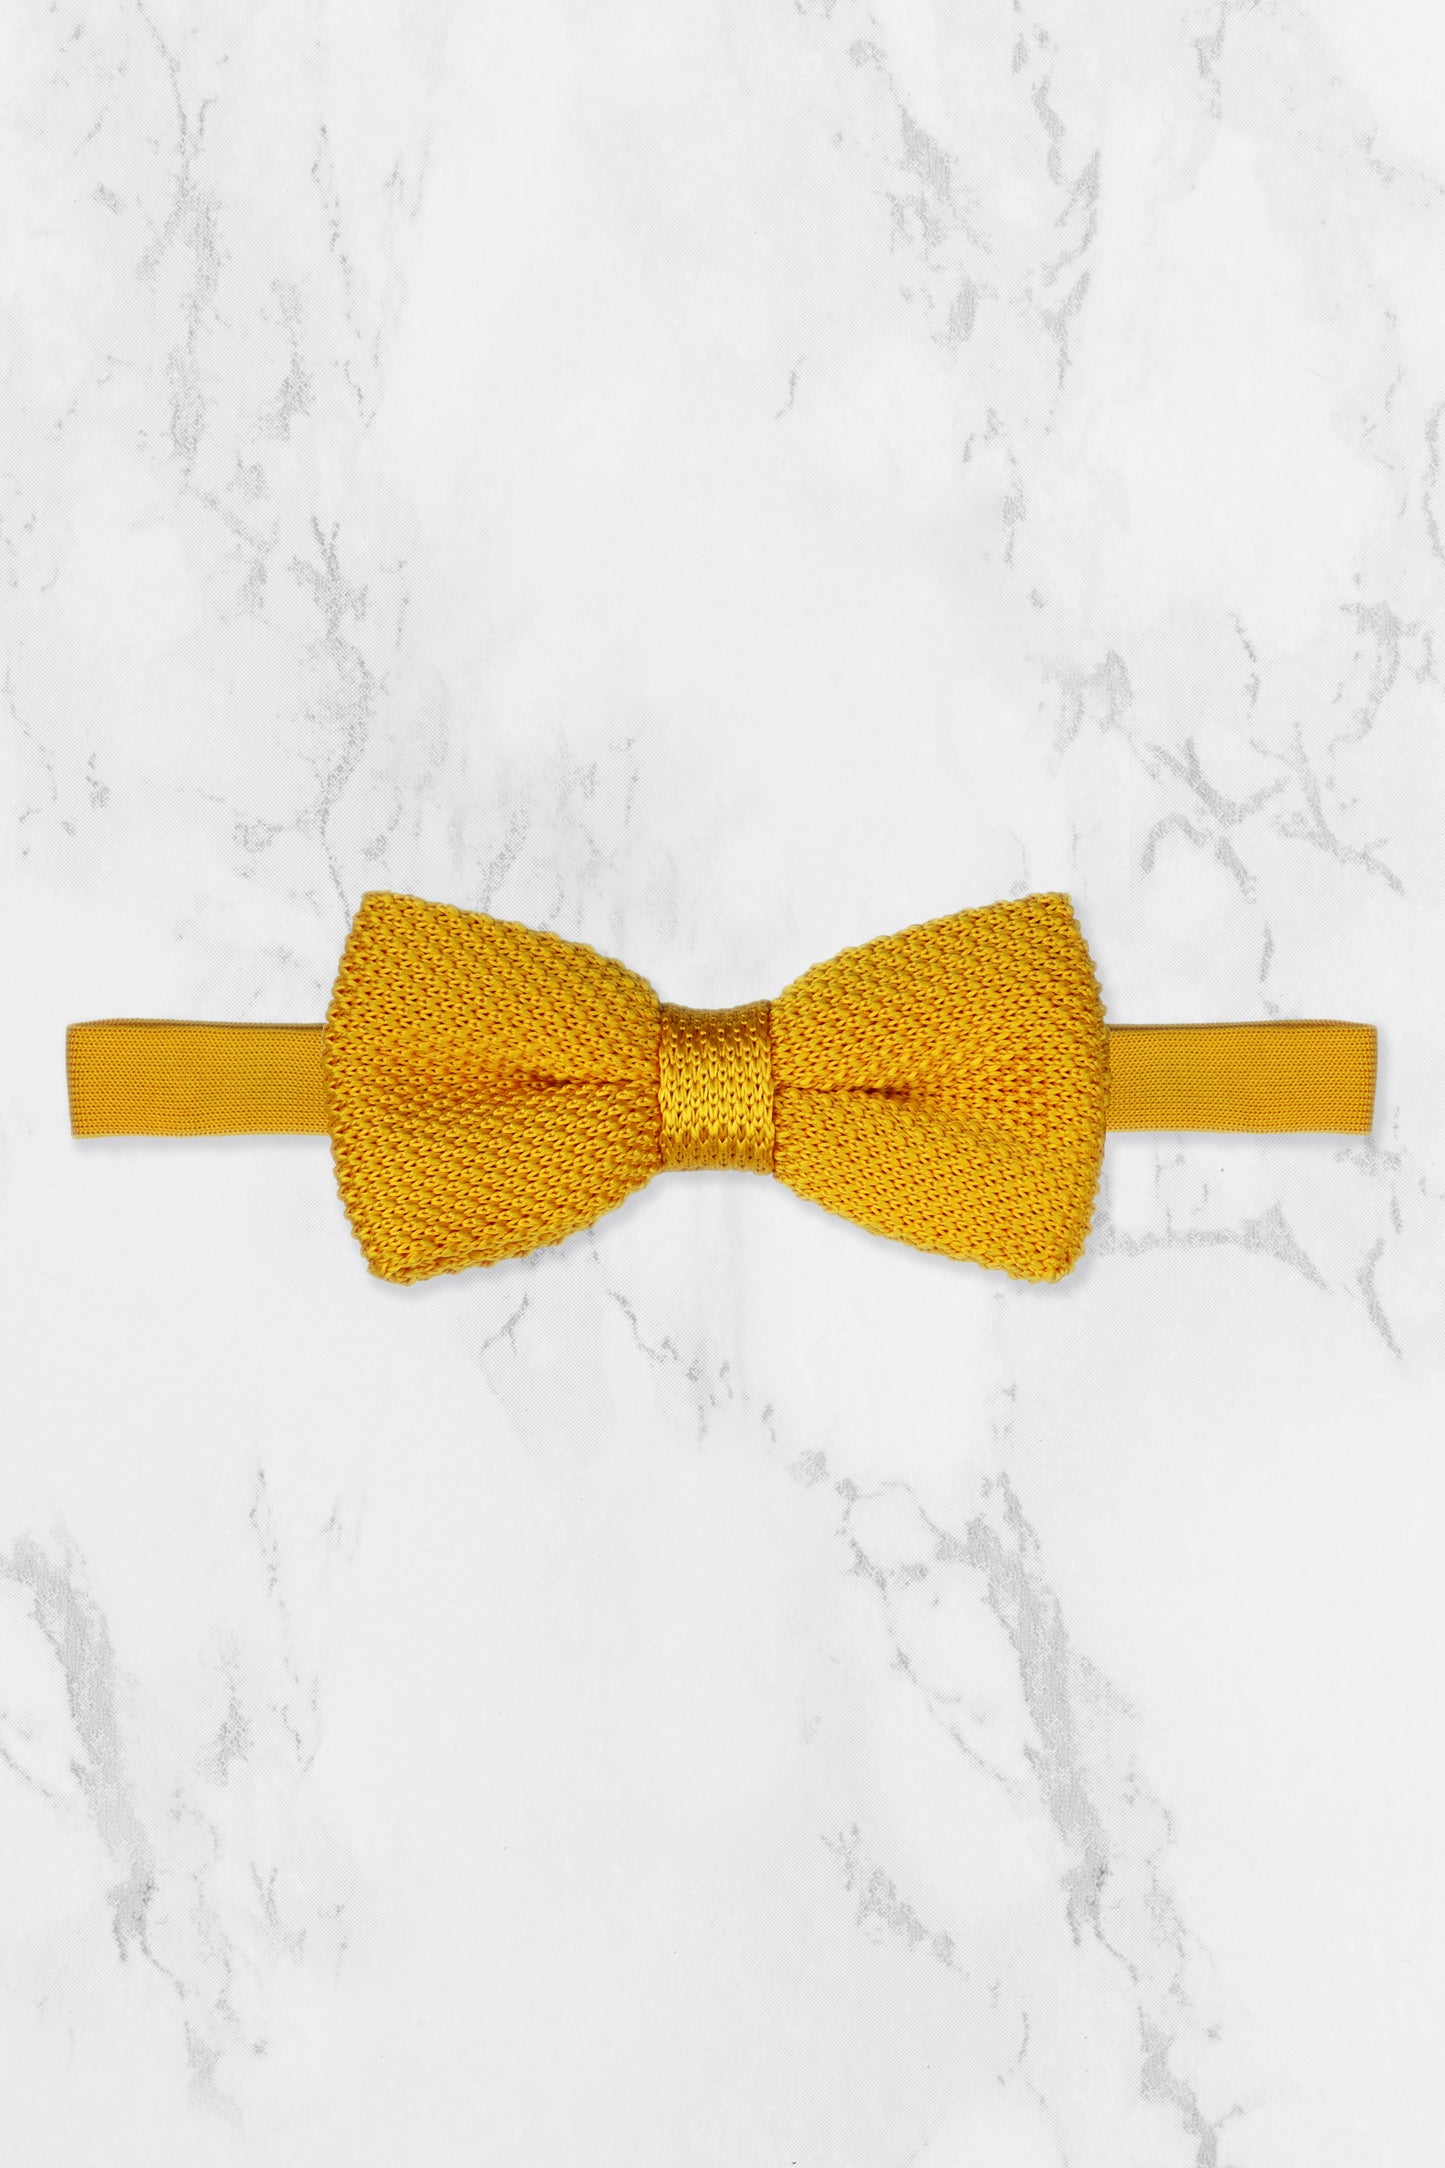 100% Polyester Square End Knitted Tie - Mustard Yellow